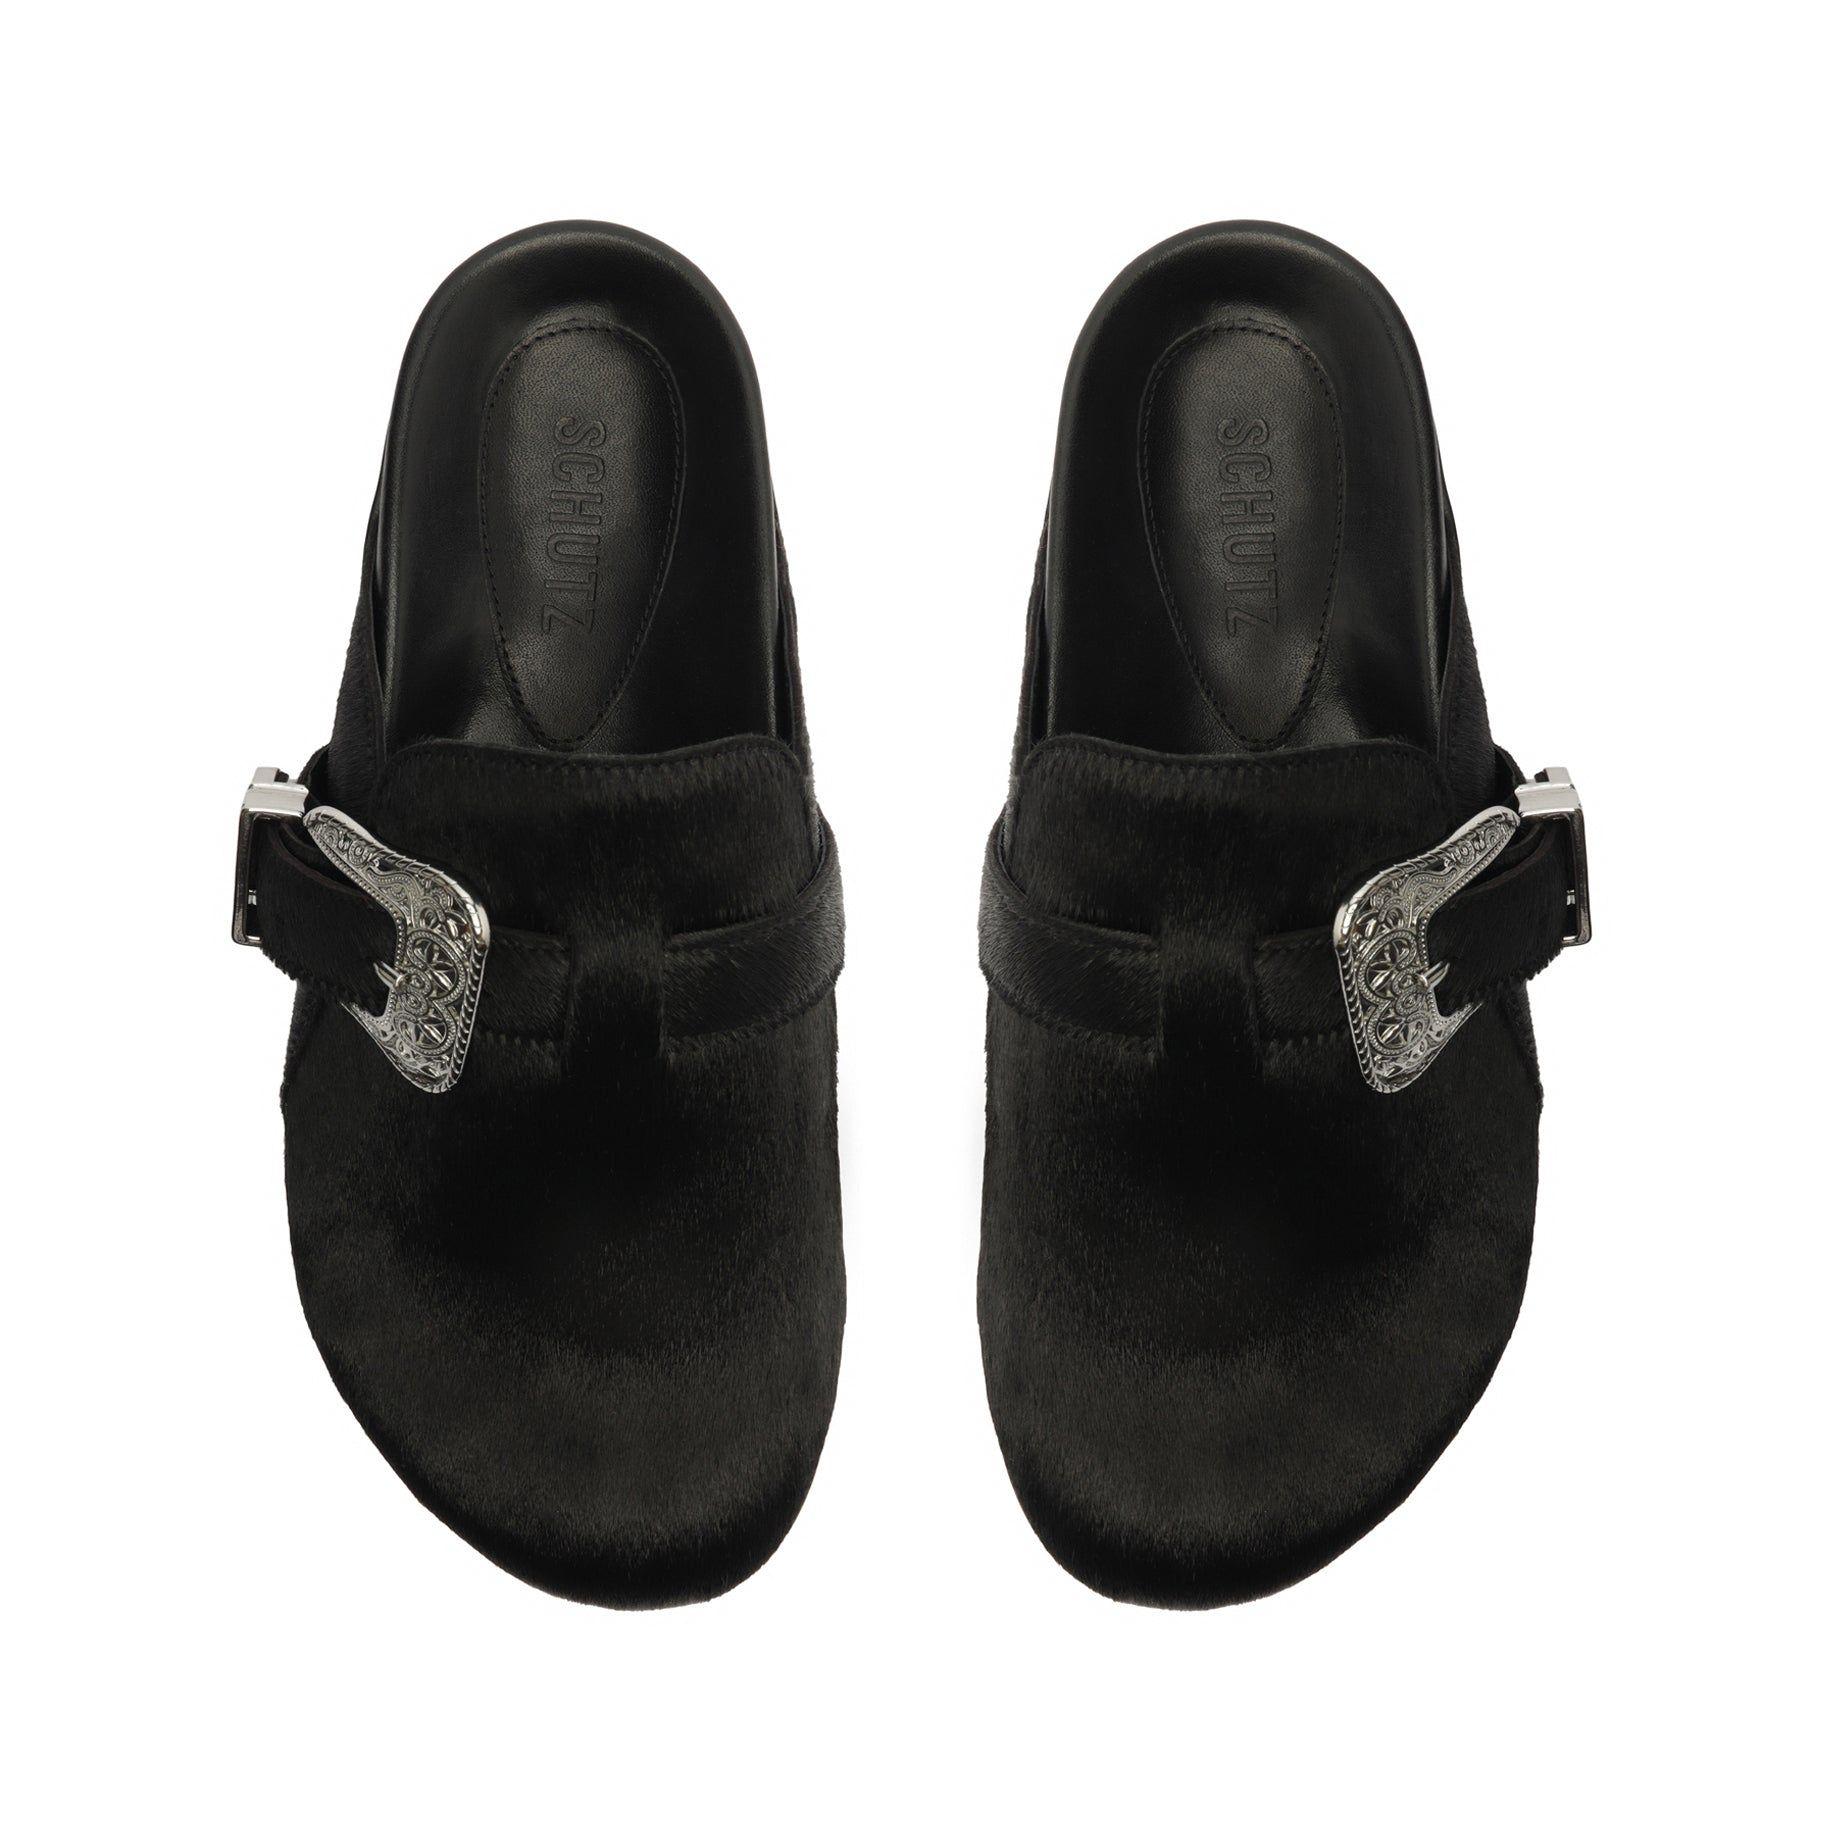 SCHUTZ SHOES Grace Calf Hair Leather Flat in Black | Lyst